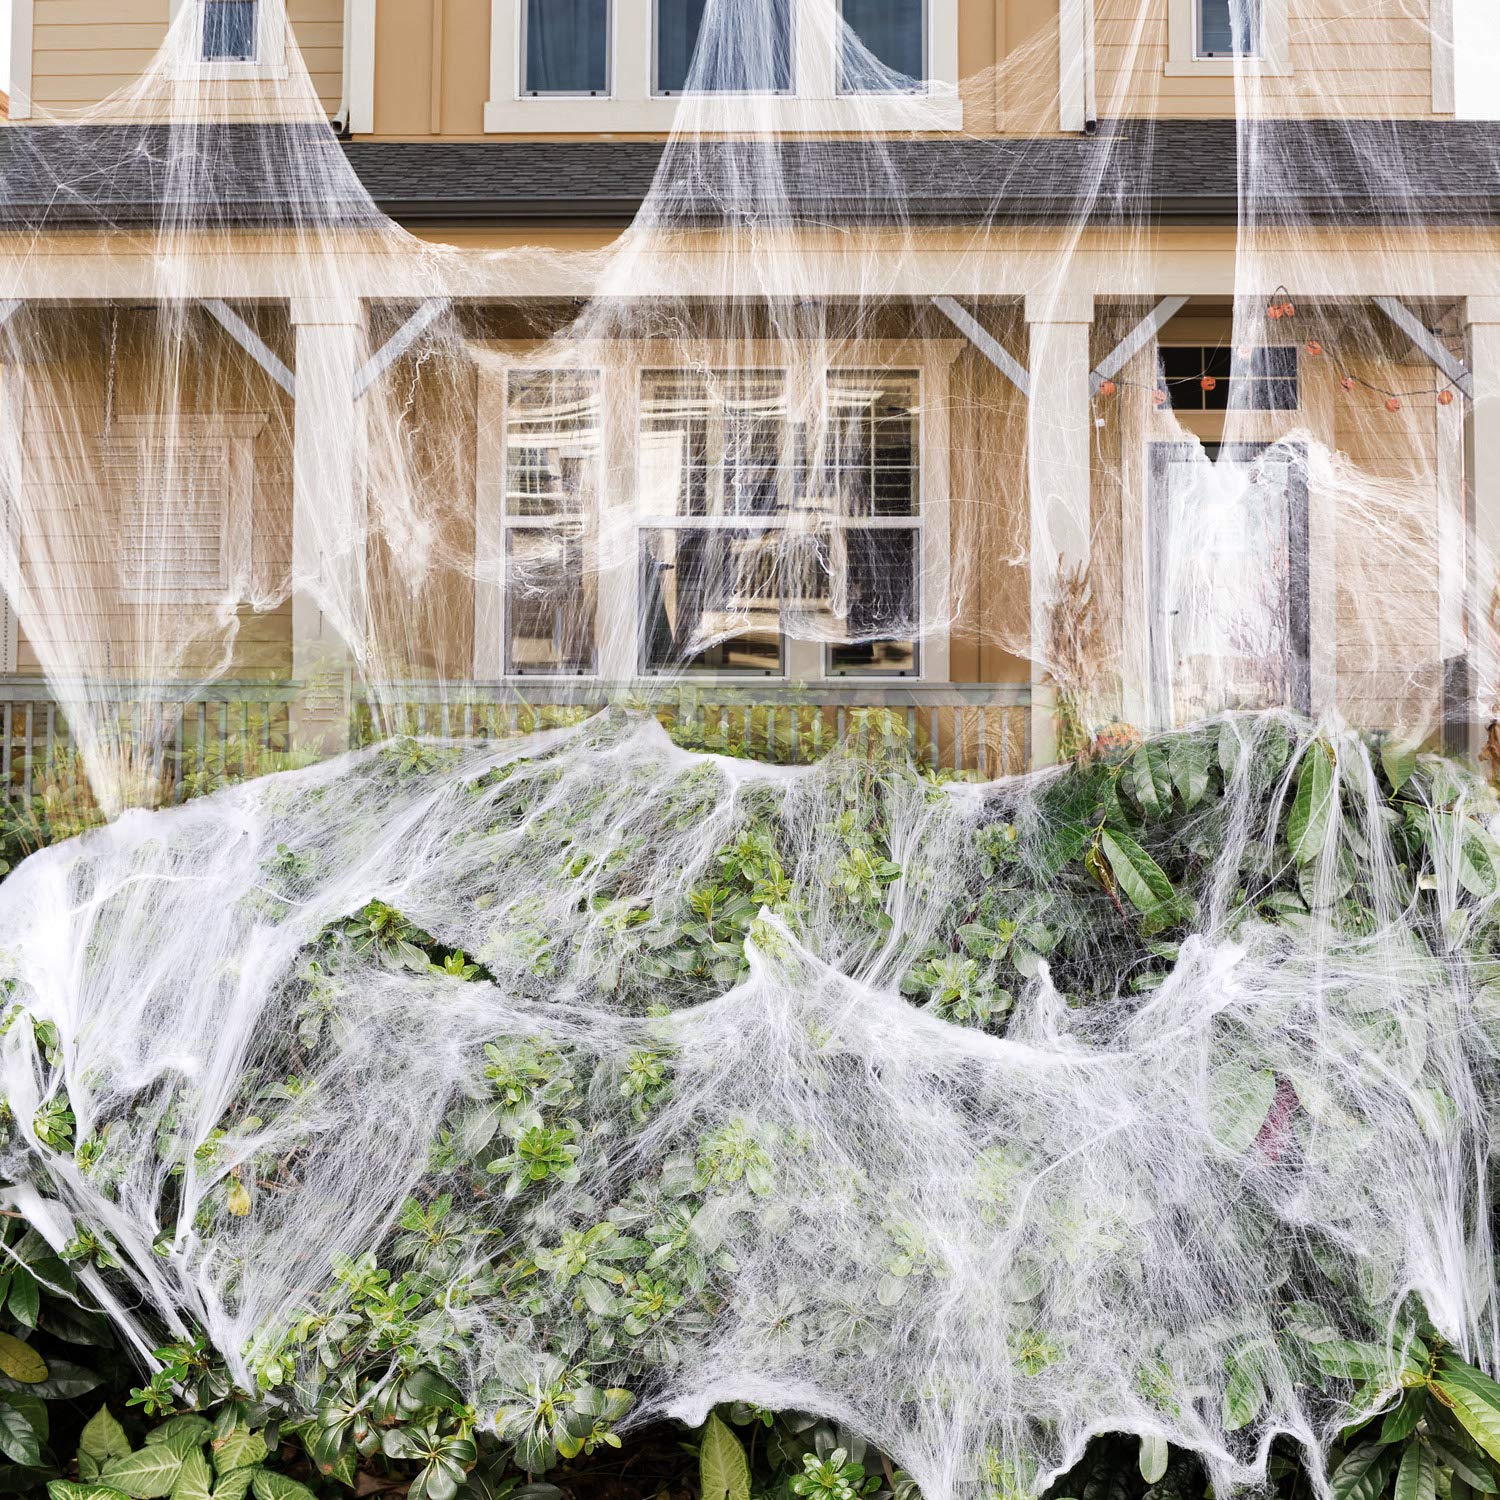 1000 sqft Stretch Spider Web for Indoor and Outdoor Halloween Decorations, Halloween Theme Party